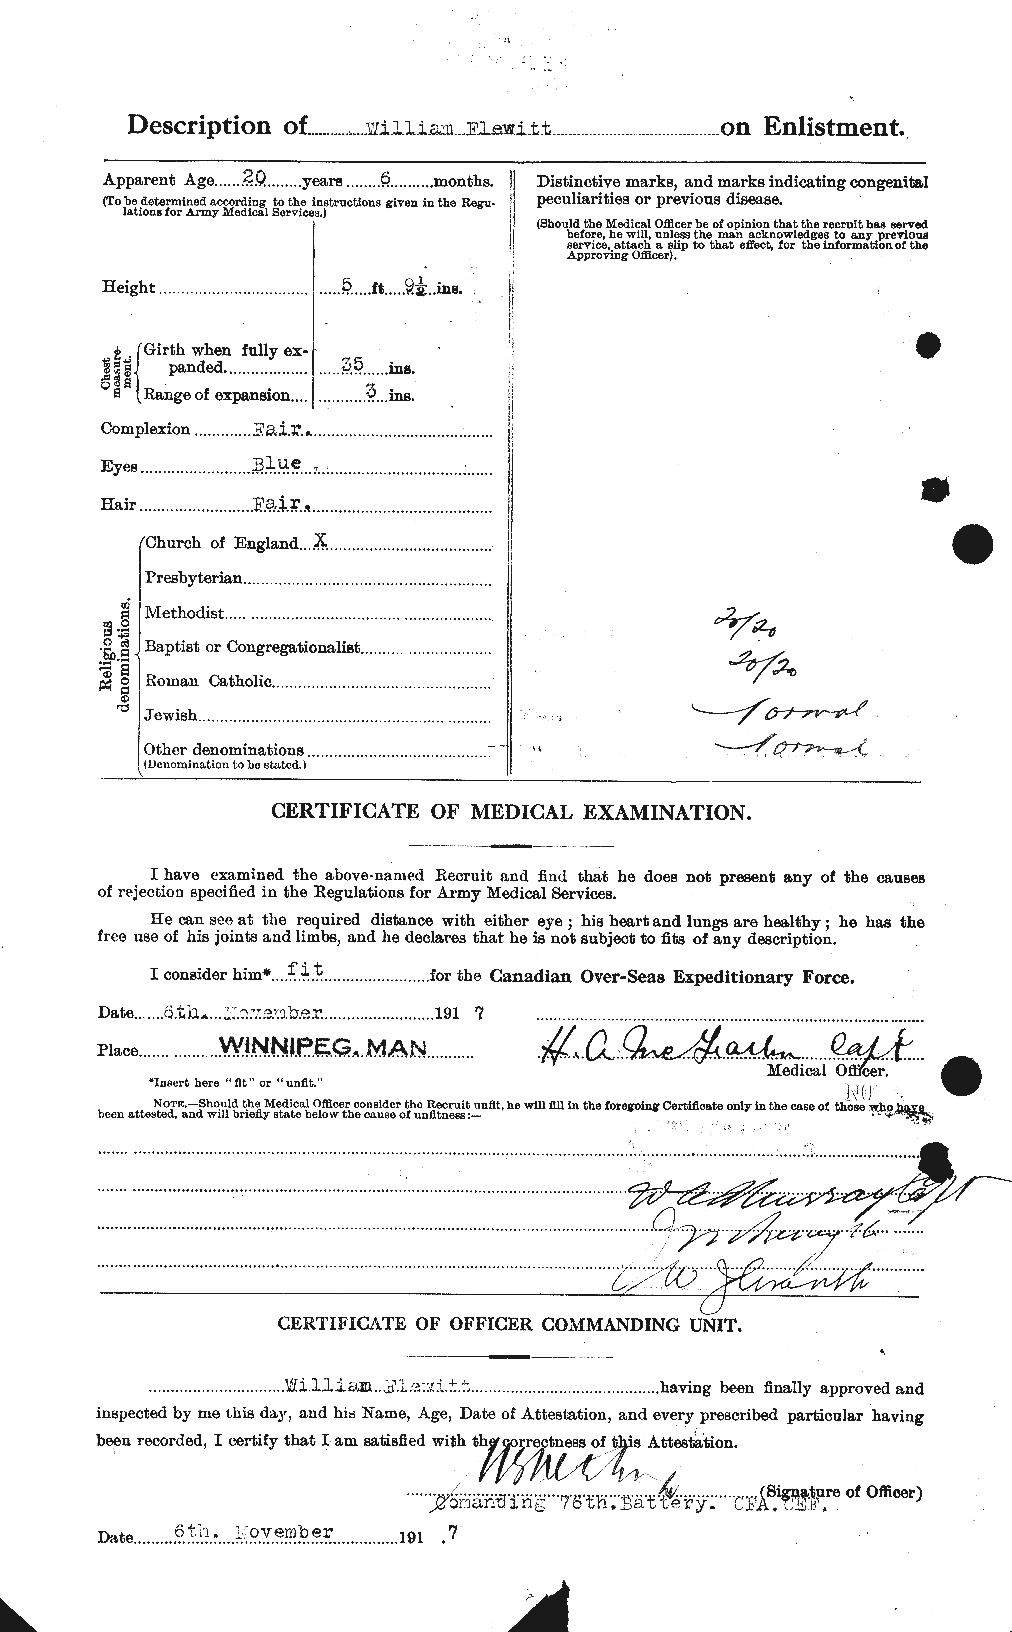 Personnel Records of the First World War - CEF 330202b